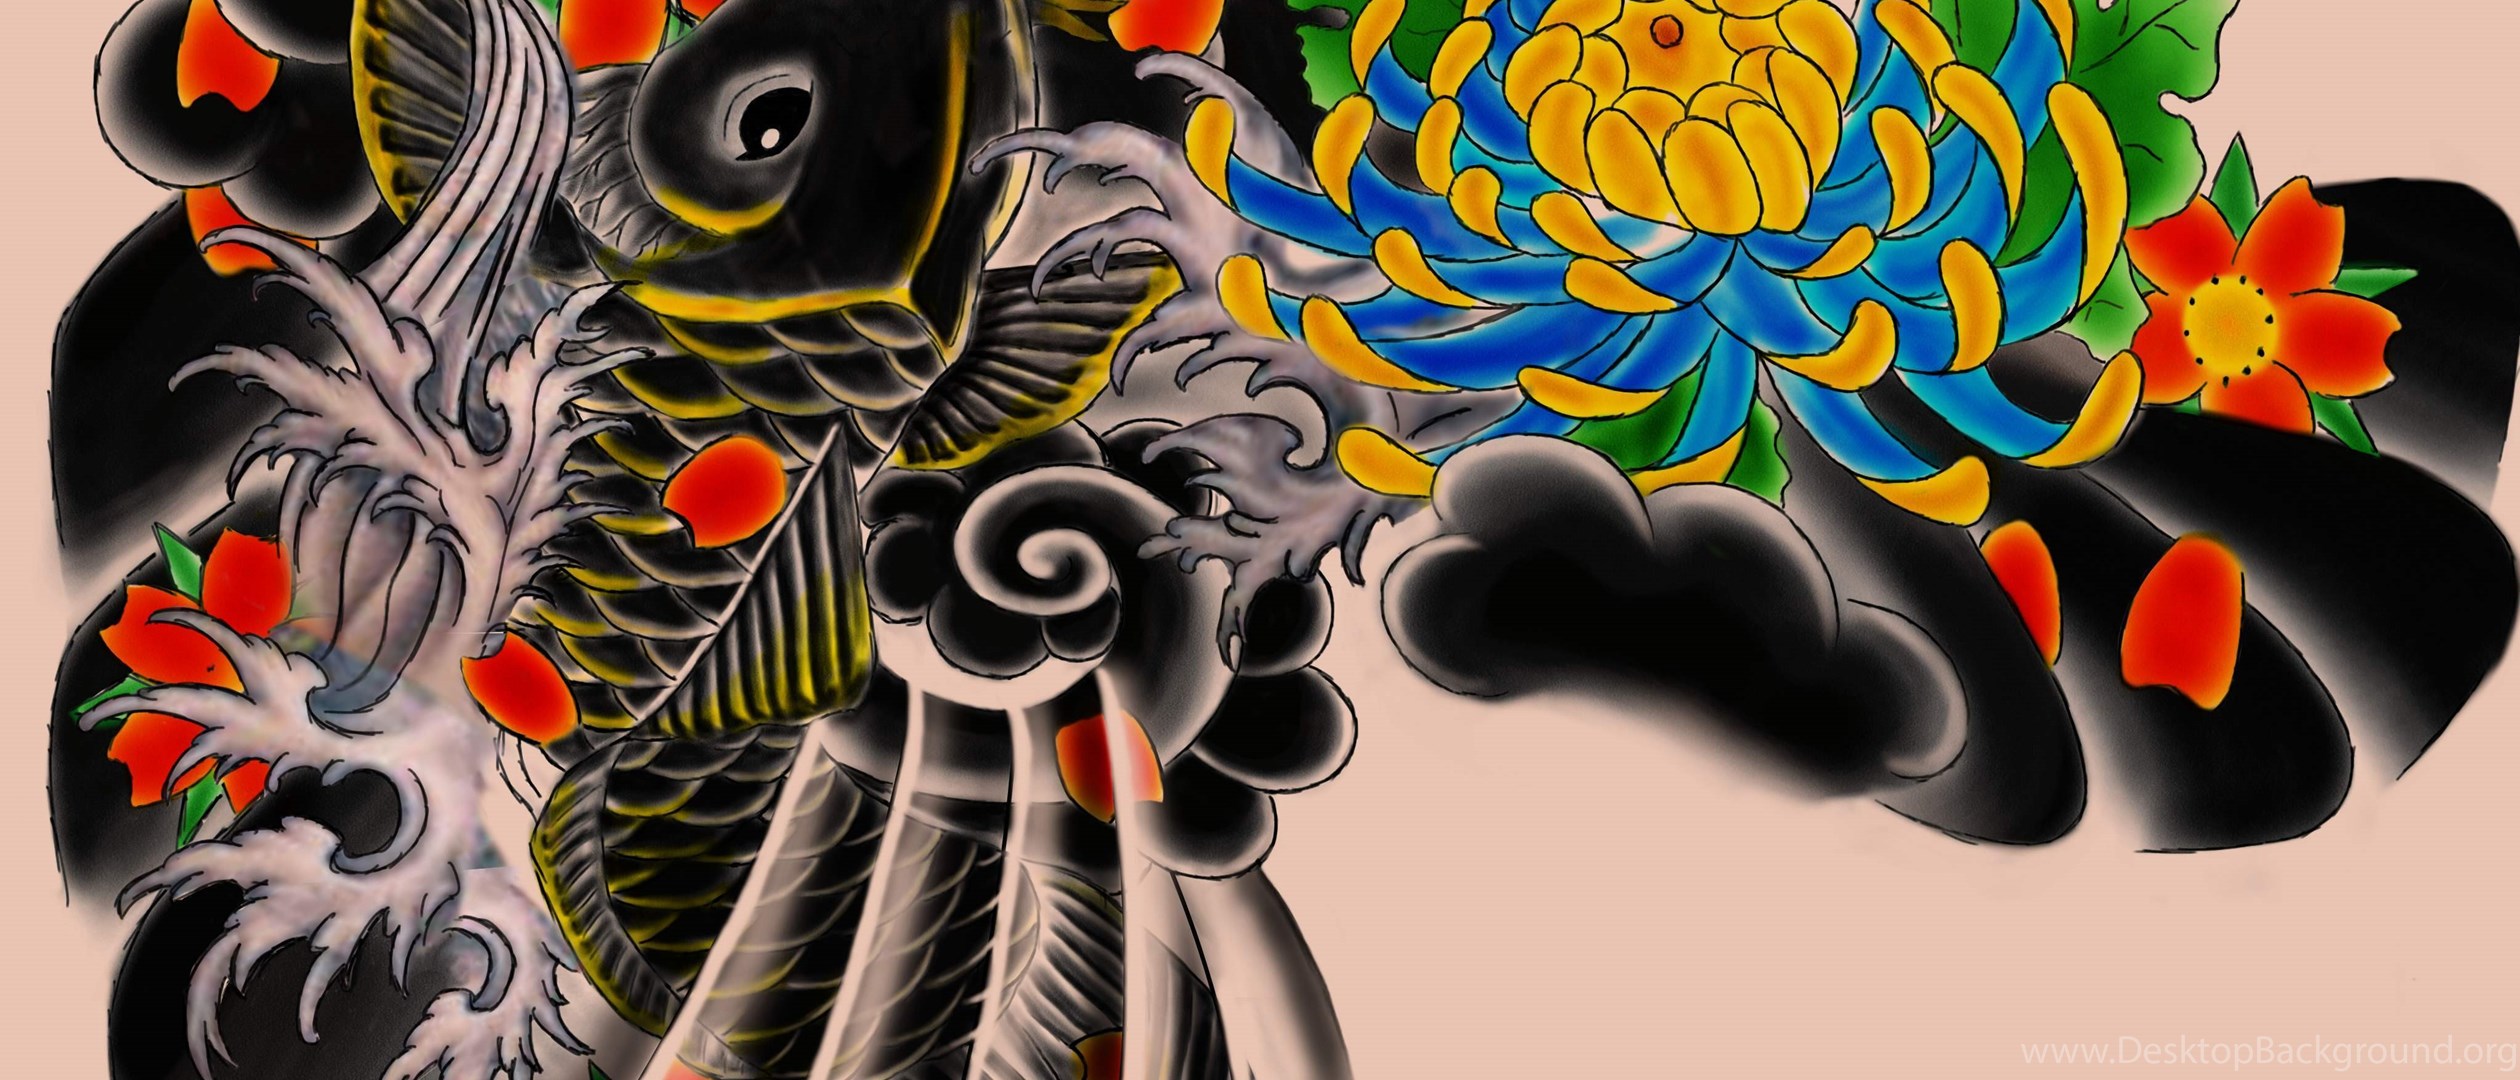 Download Download Japanese Tattoos Color Design Art Images Wallpapers HD .....